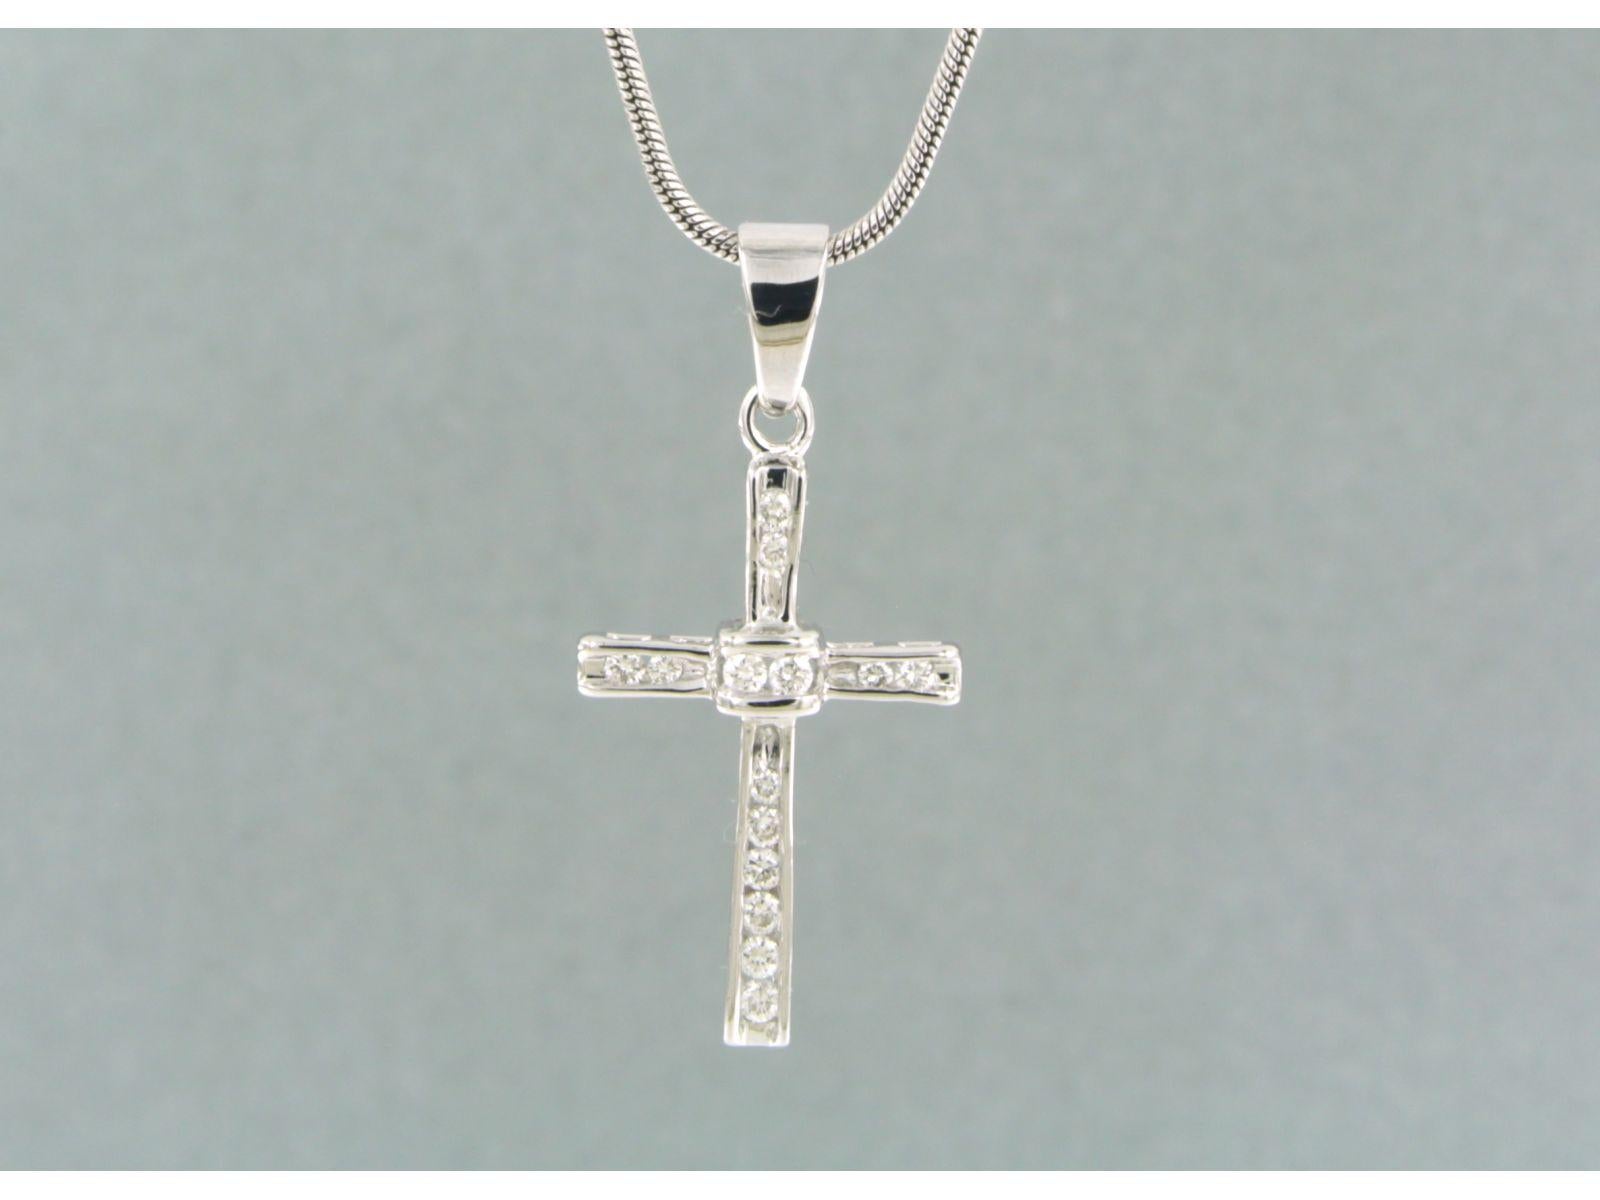 Necklace and pendant set with diamonds total 0.20ct - 14k white gold For Sale 2